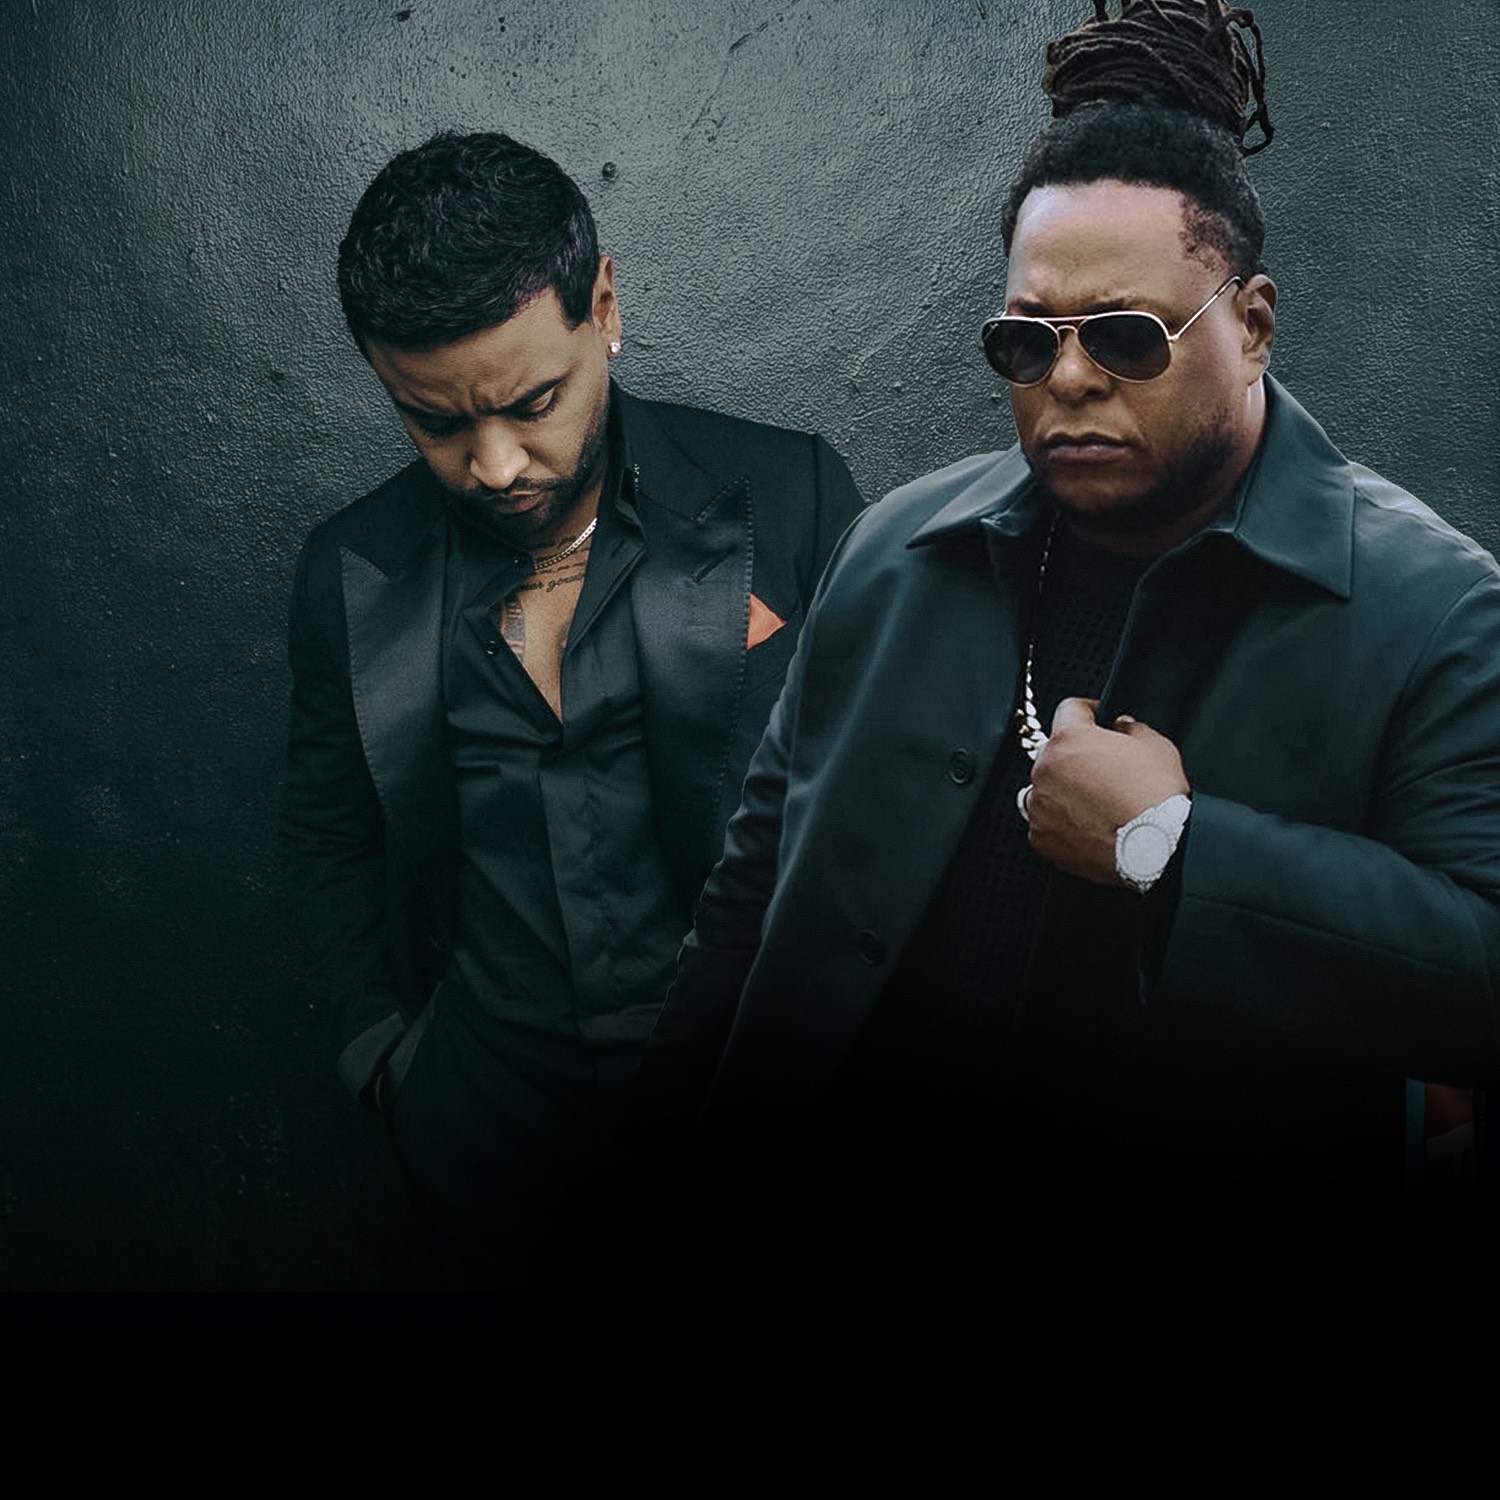 MAGNUS TALENT AGENCY SIGNS CHART TOPPING URBAN MUSIC DUO ZION & LENNOX FOR EXCLUSIVE WORLDWIDE BOOKINGS REPRESENTATION